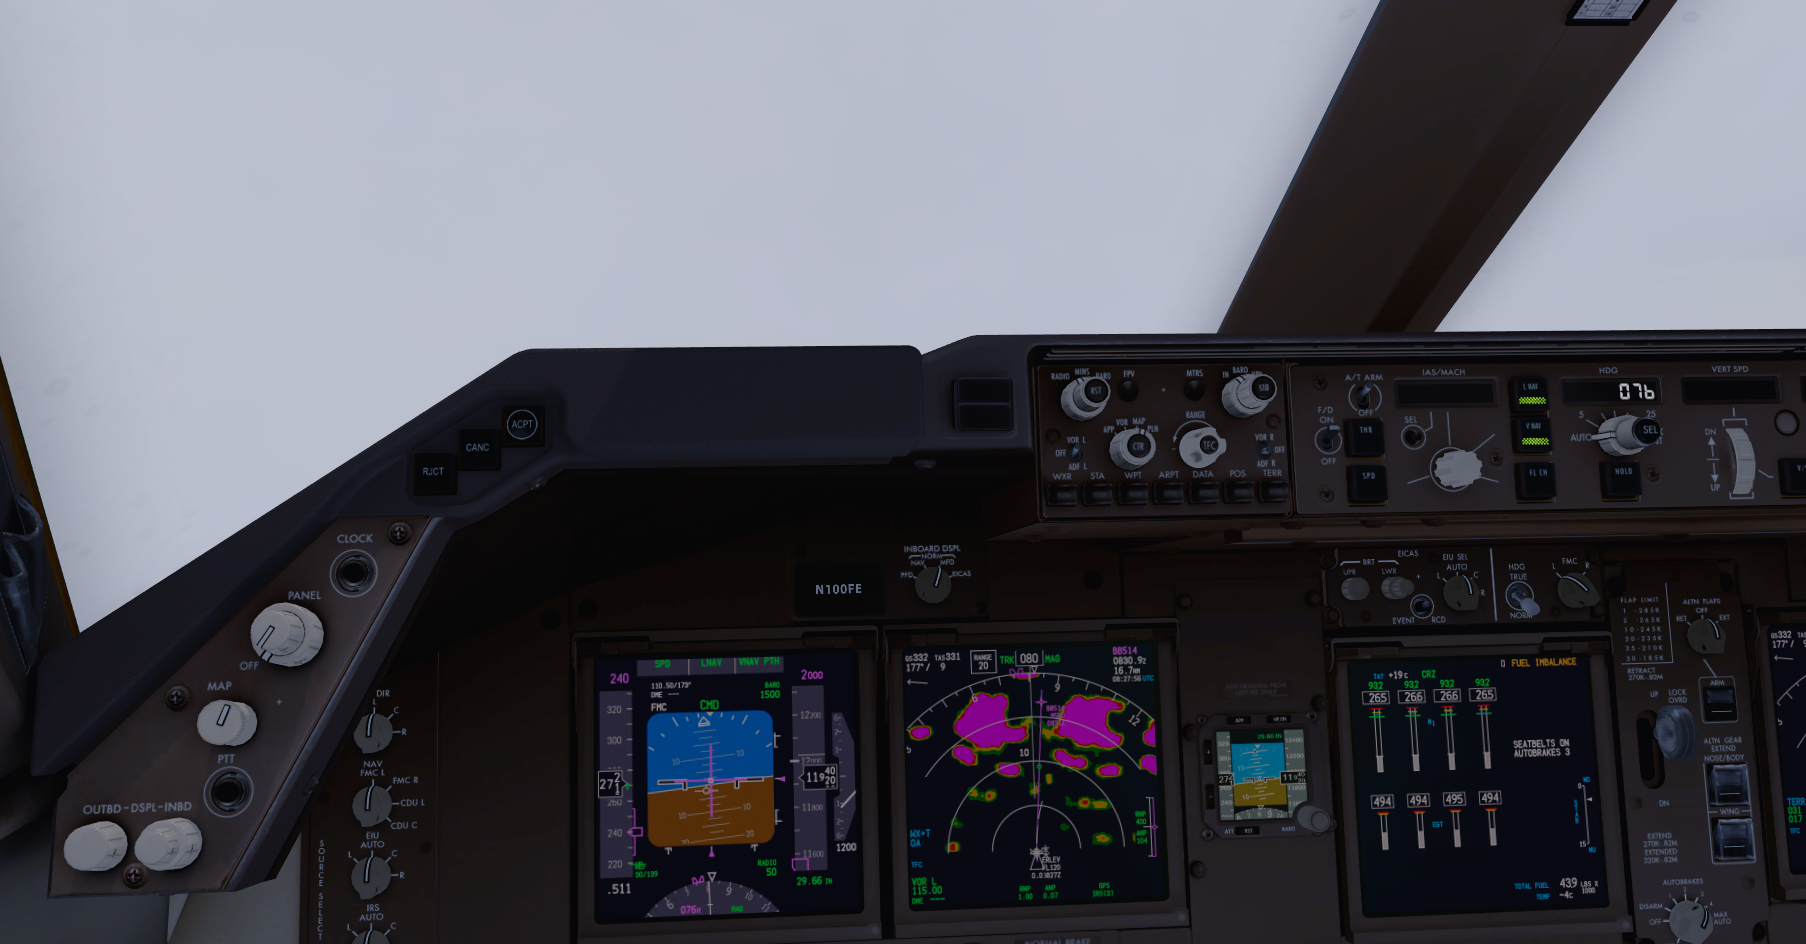 My approach to UBBB today (Tour AN225 leg 2).  Man was it bumpy along that STAR and final approach.